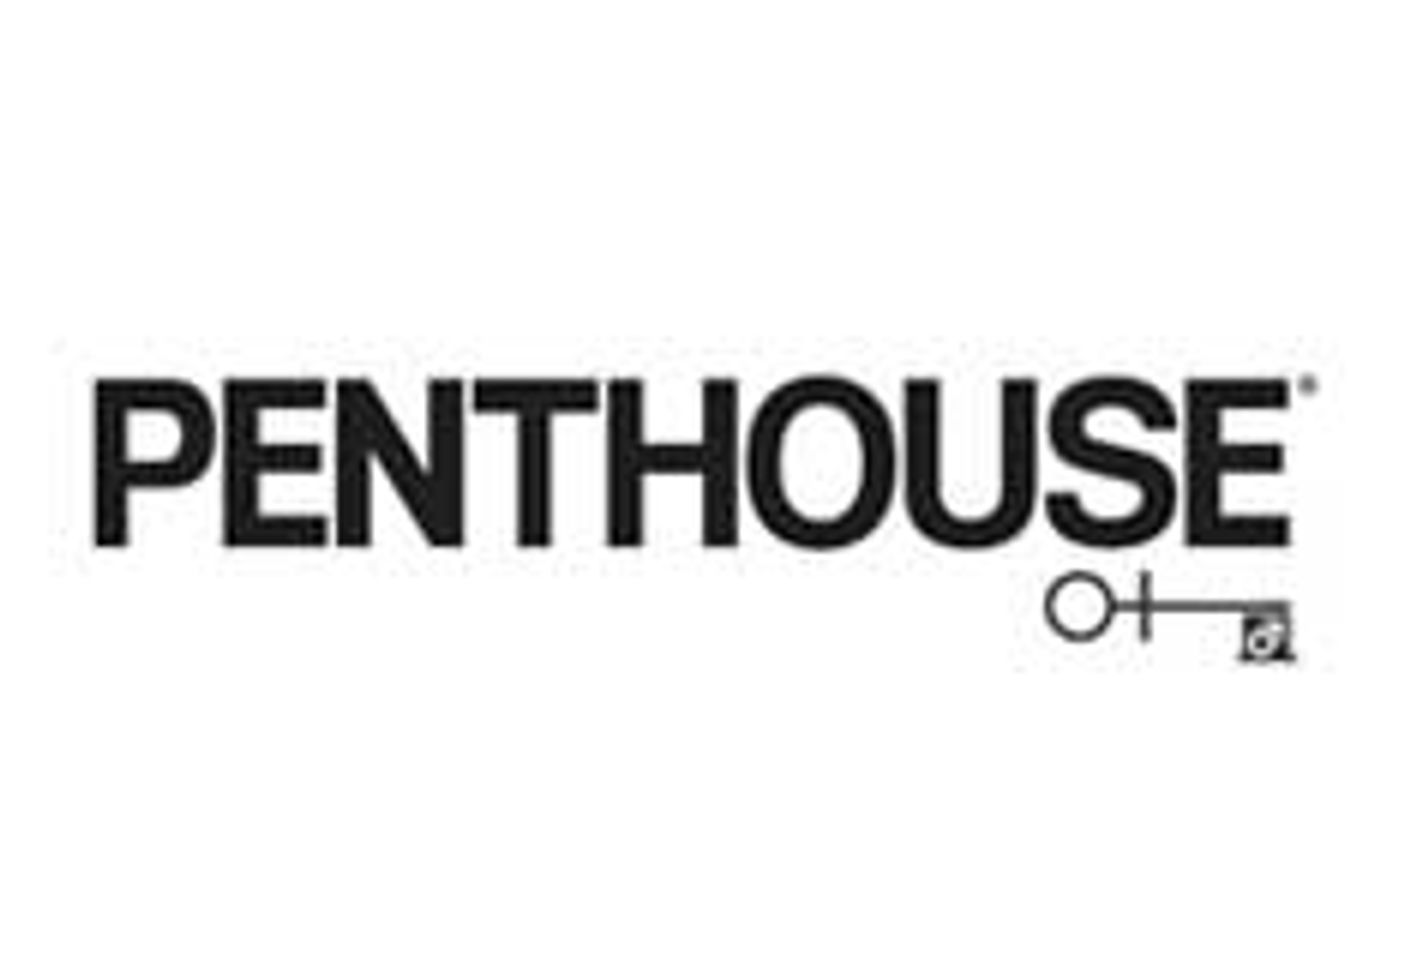 Penthouse Features Releases 'Cheating Sex'